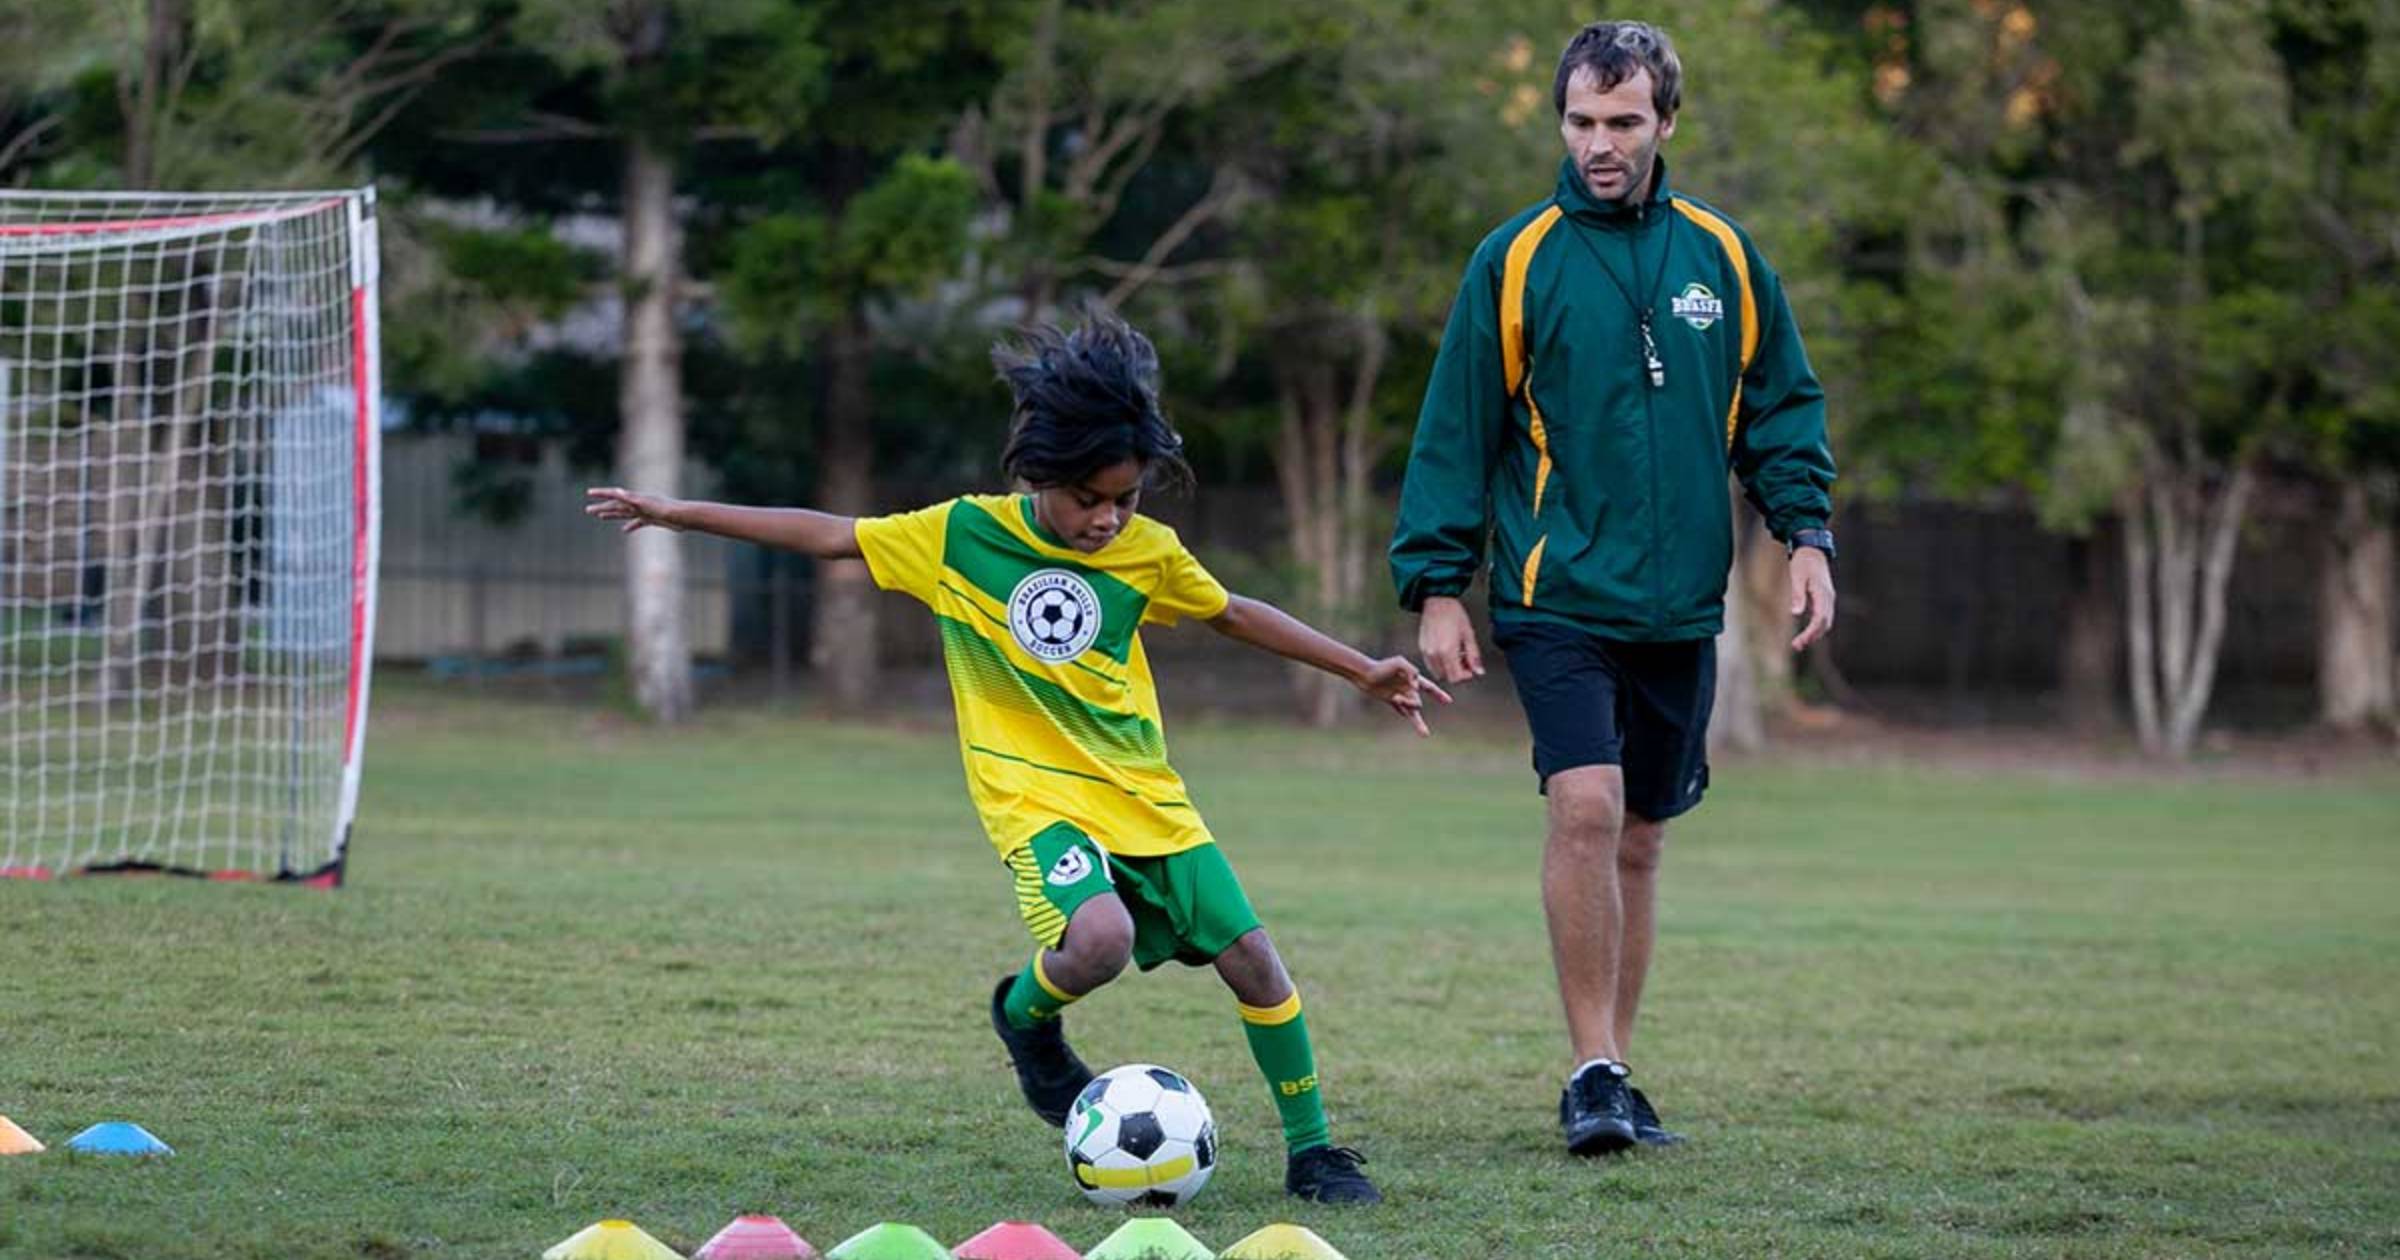 Child Playing Soccer With Coach